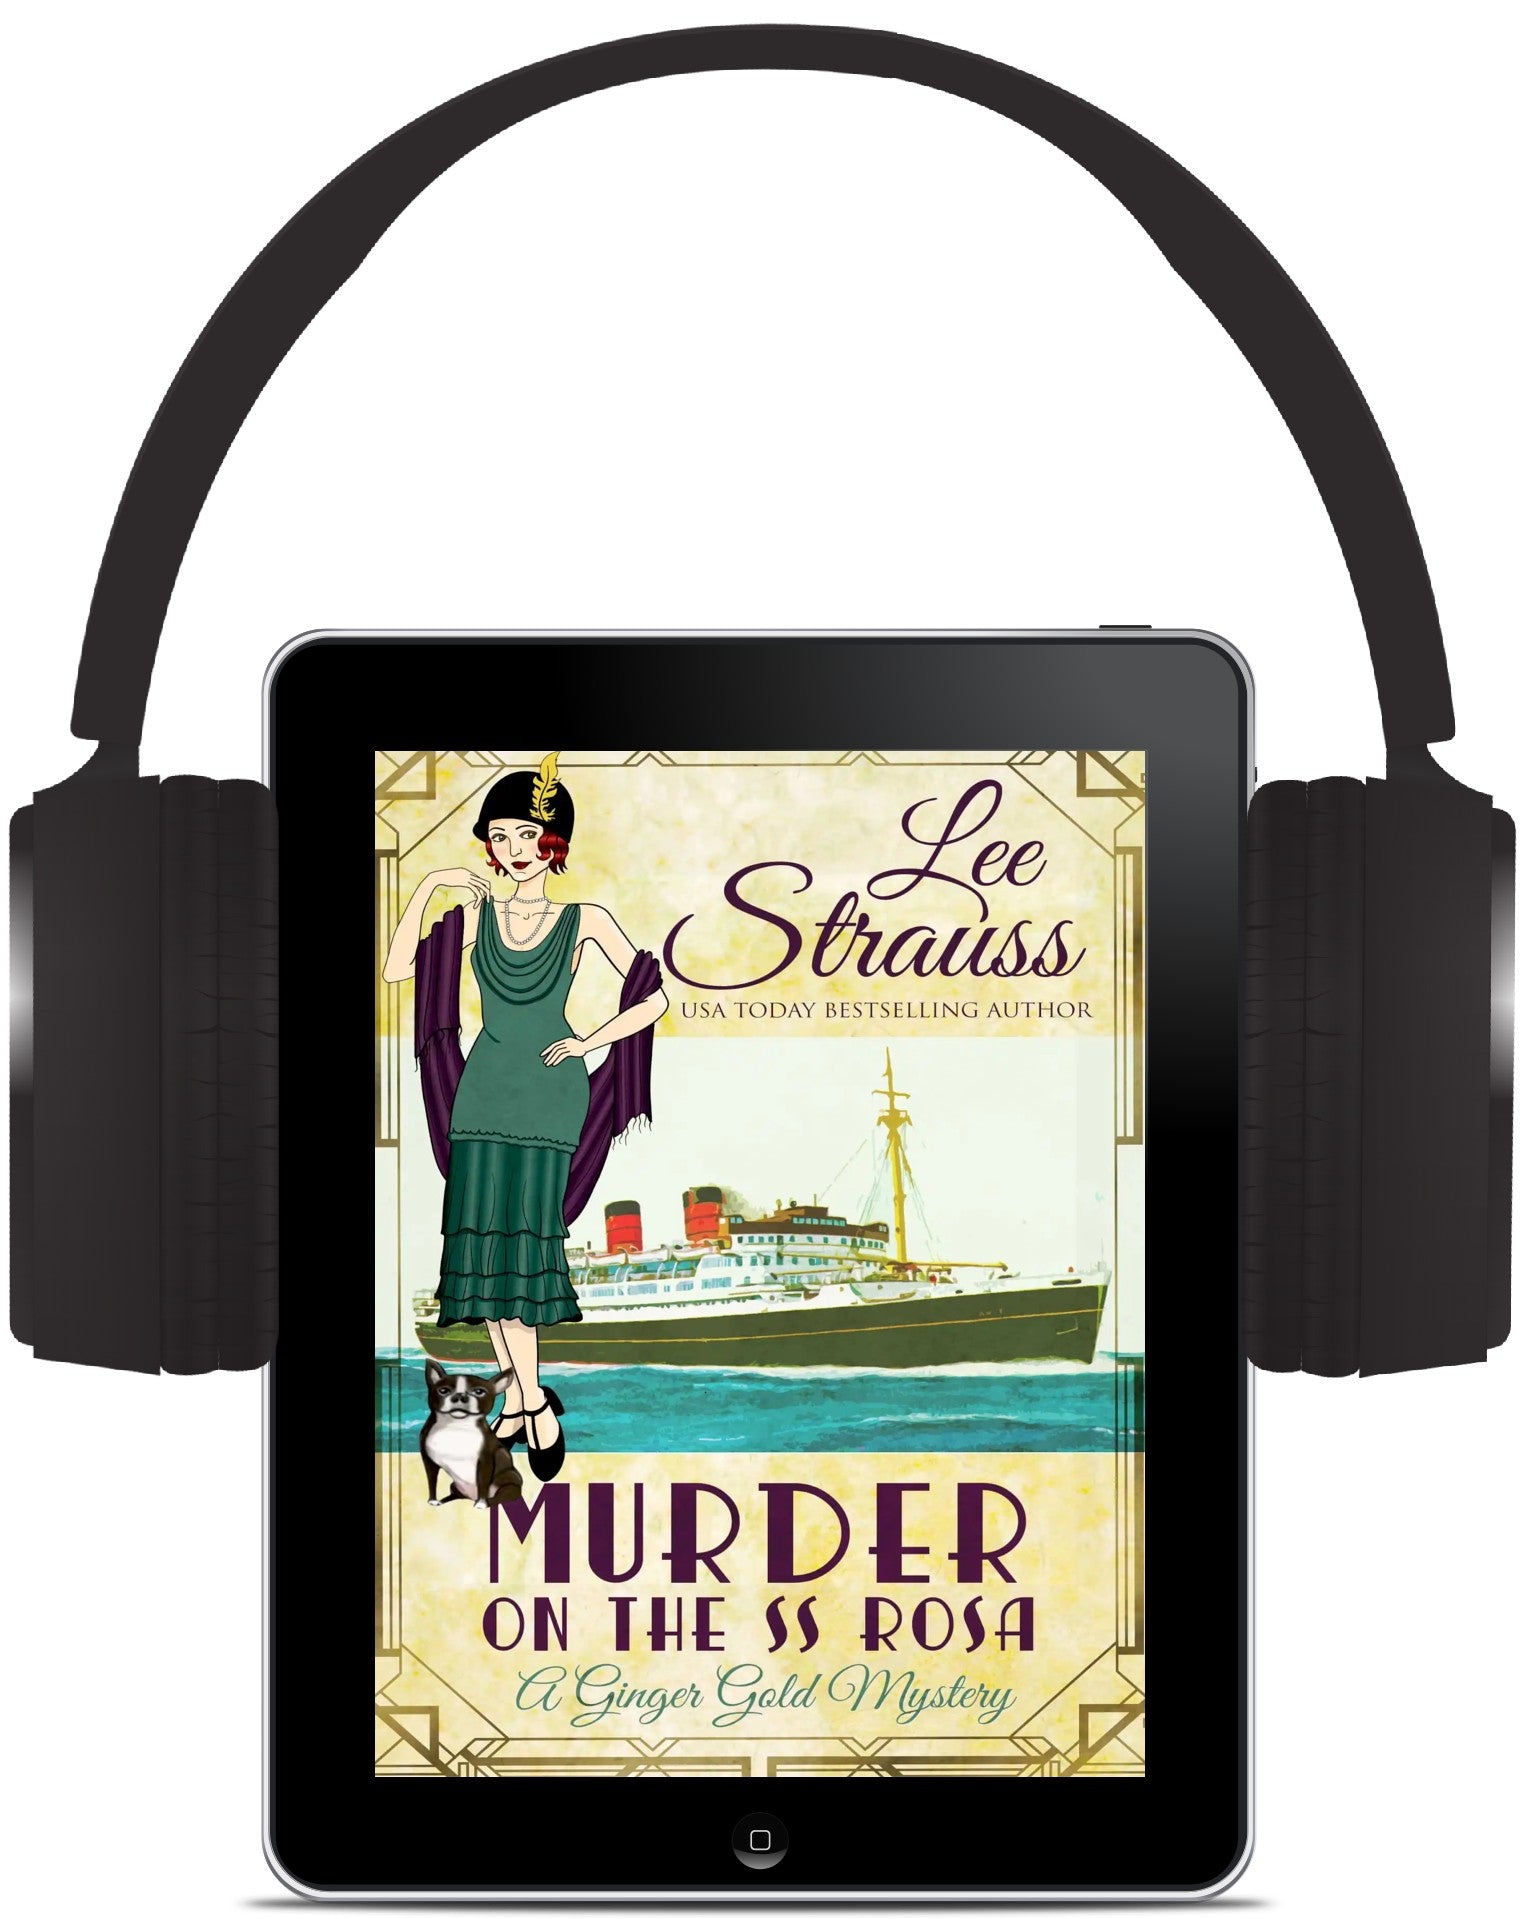 Murder on the SS Rosa, A Ginger Gold Mystery, 1920s cozy historical mystery by Lee Strauss